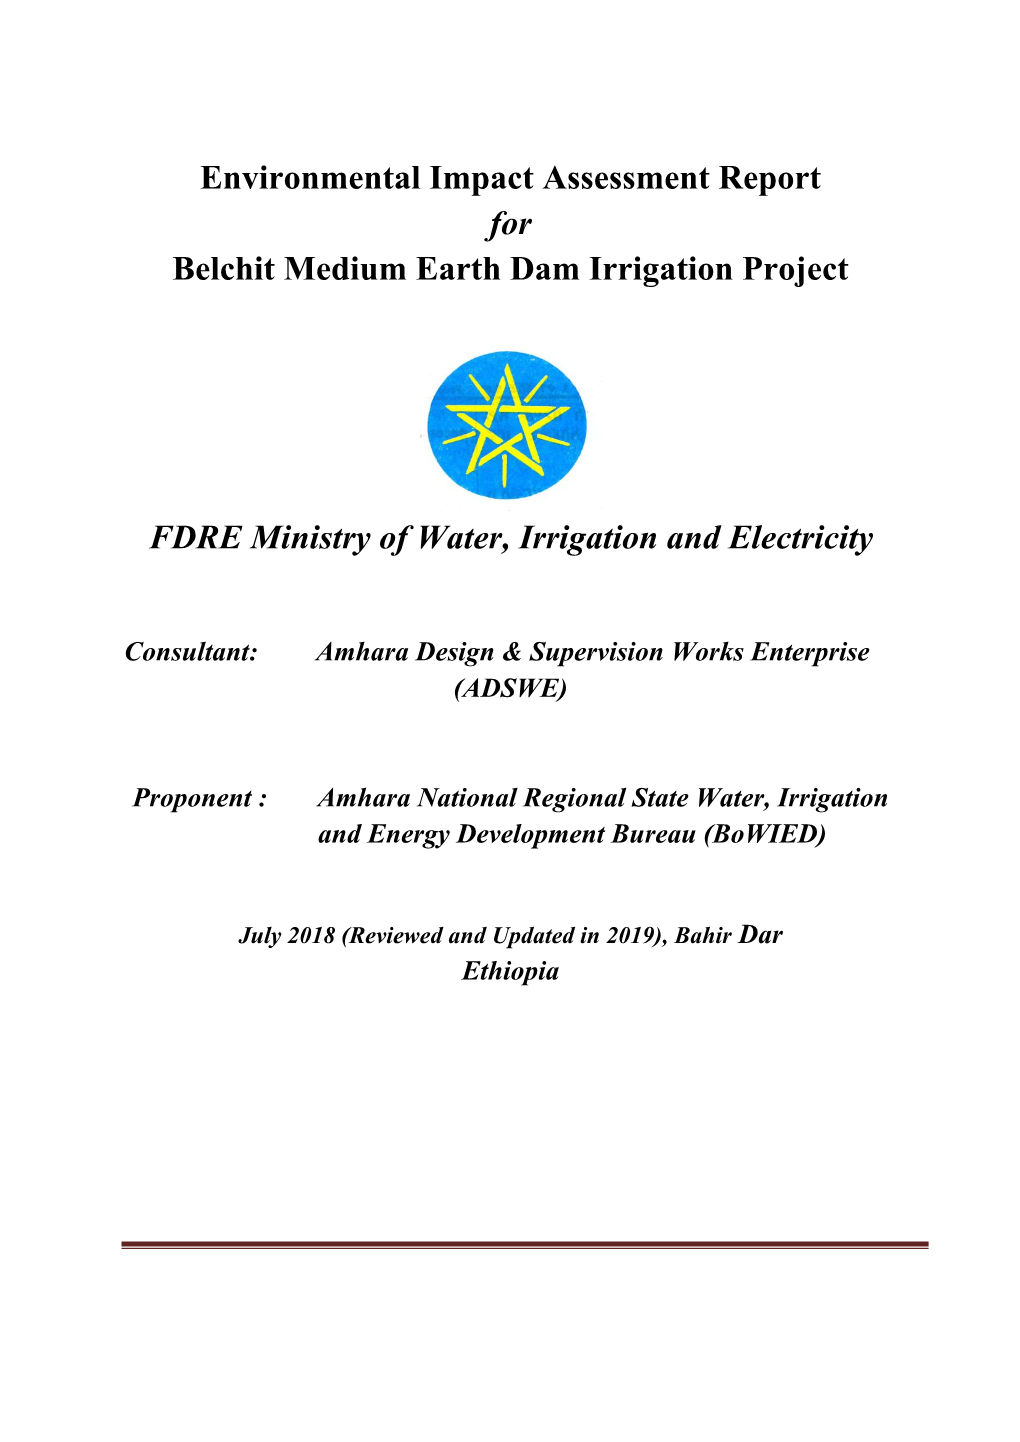 Environmental Impact Assessment Report for Belchit Medium Earth Dam Irrigation Project FDRE Ministry of Water, Irrigation and Electricity